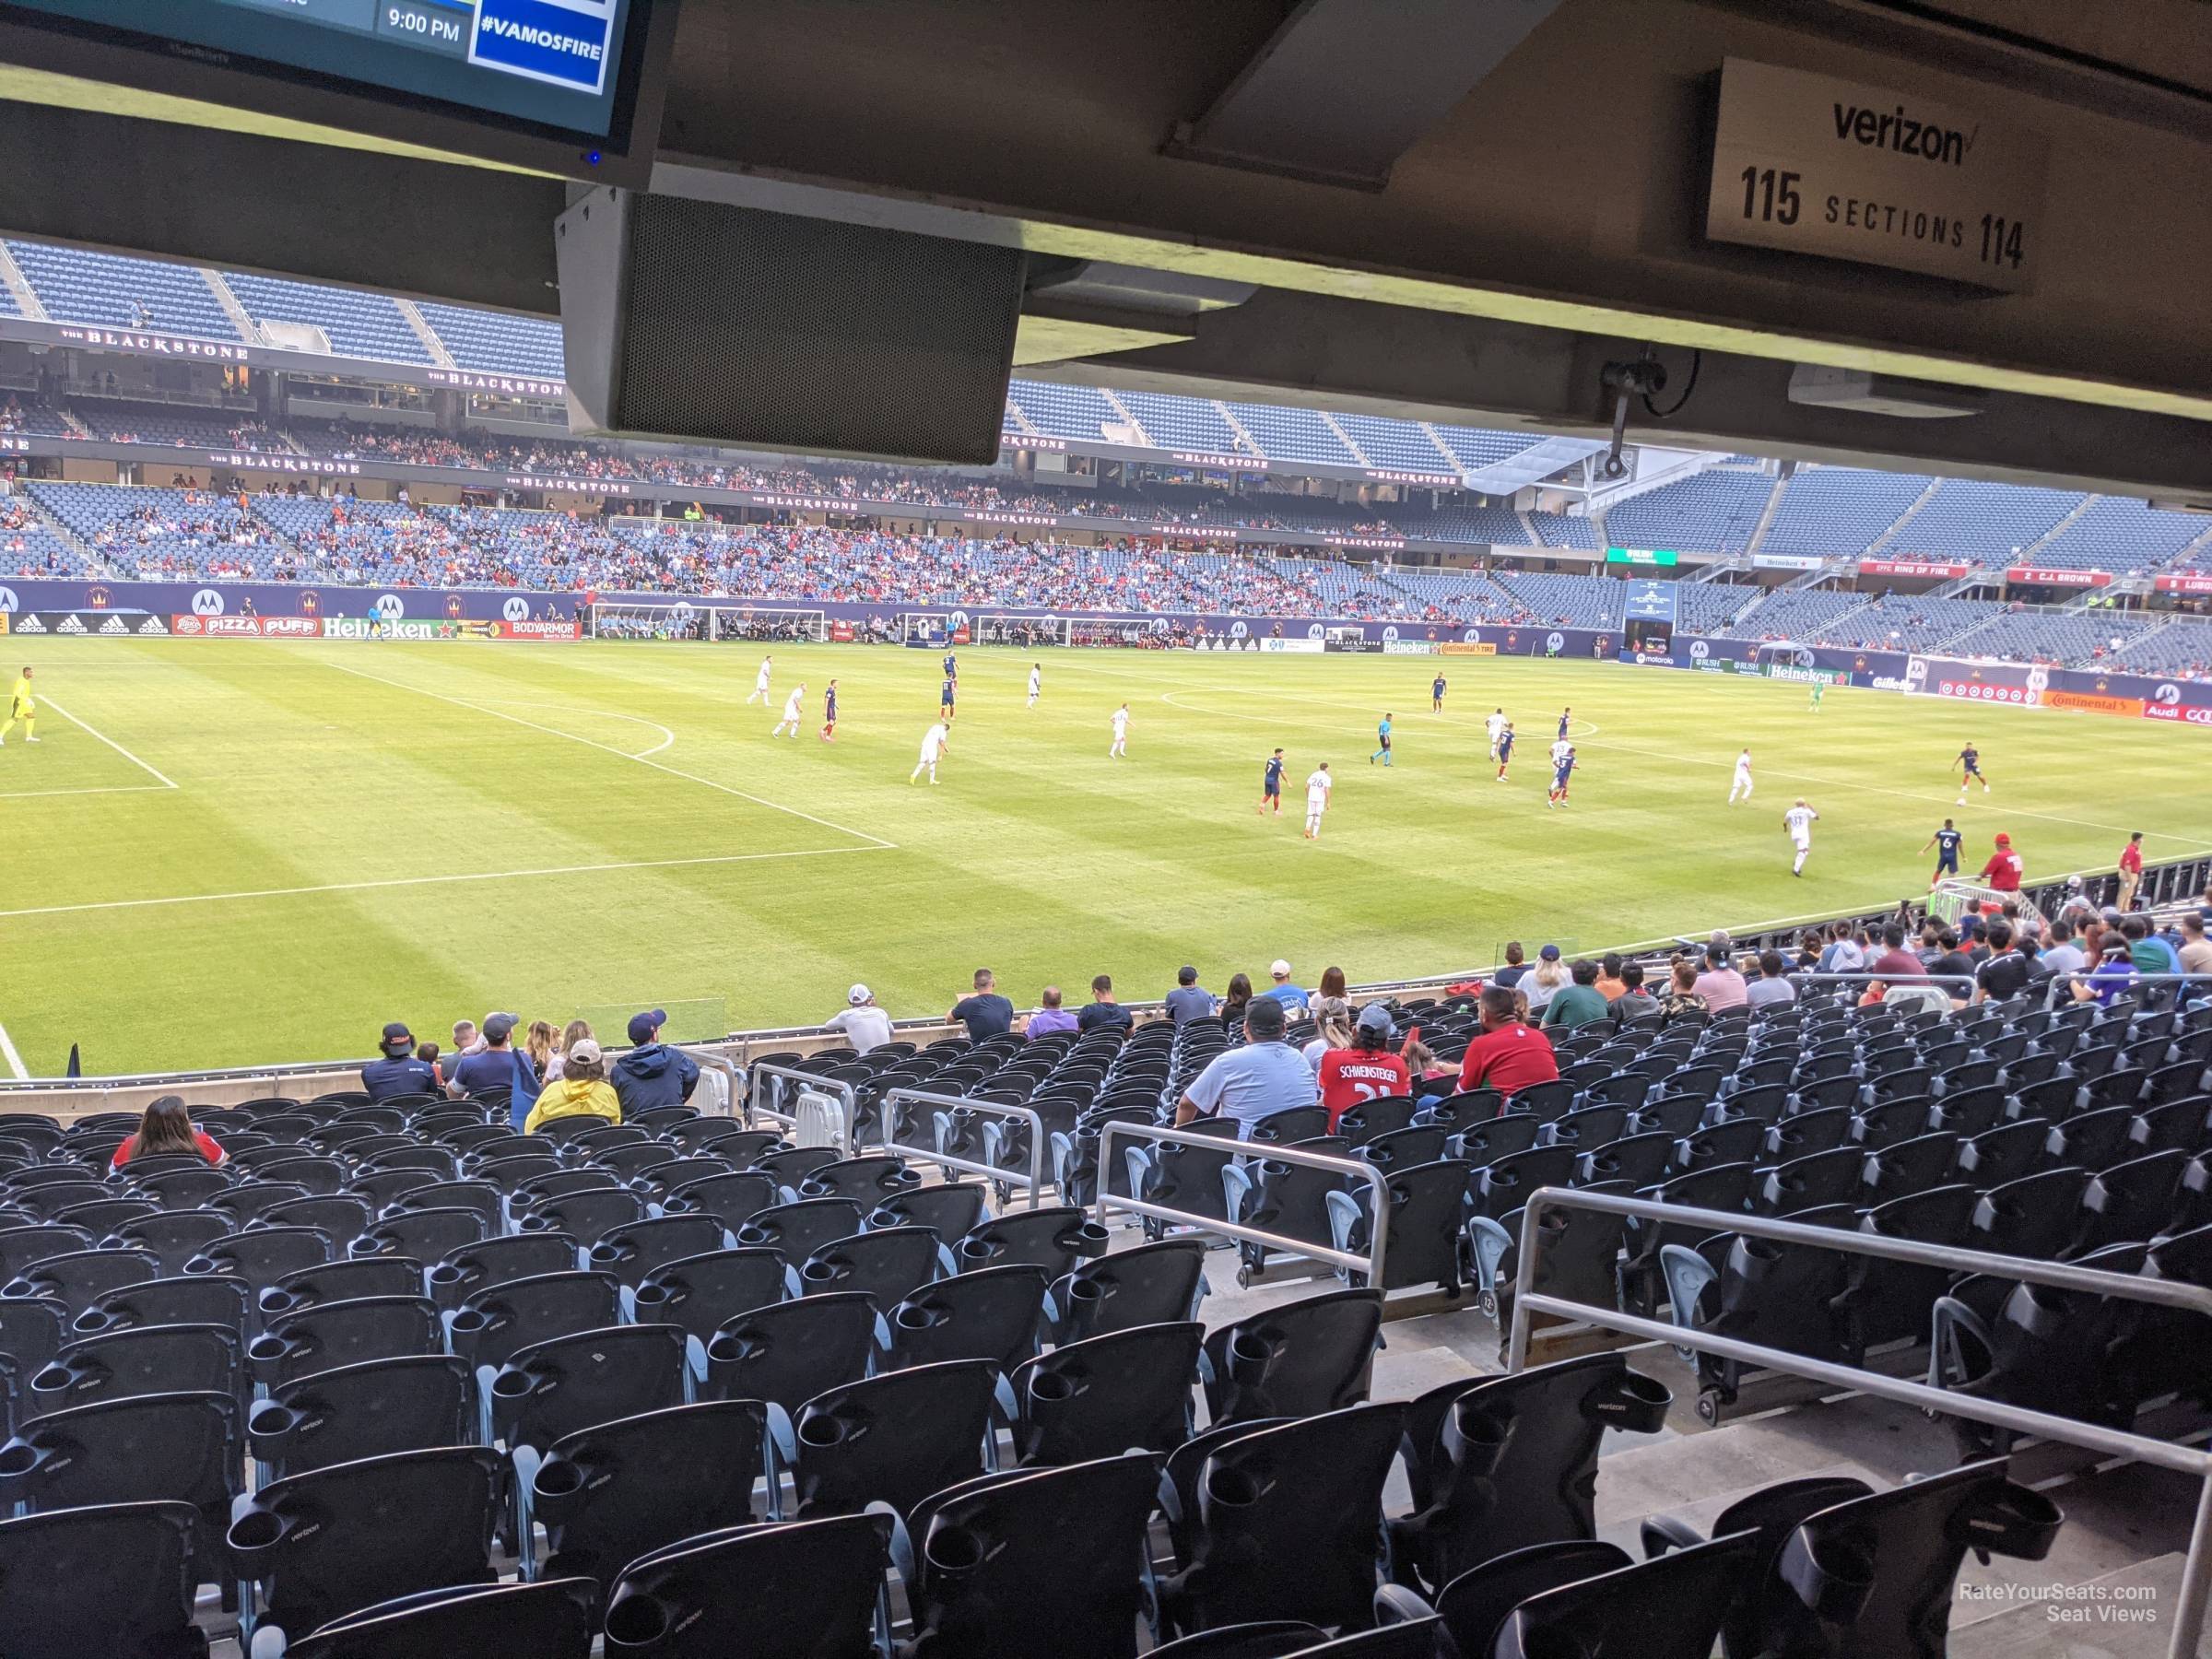 section 115, row 18 seat view  for soccer - soldier field